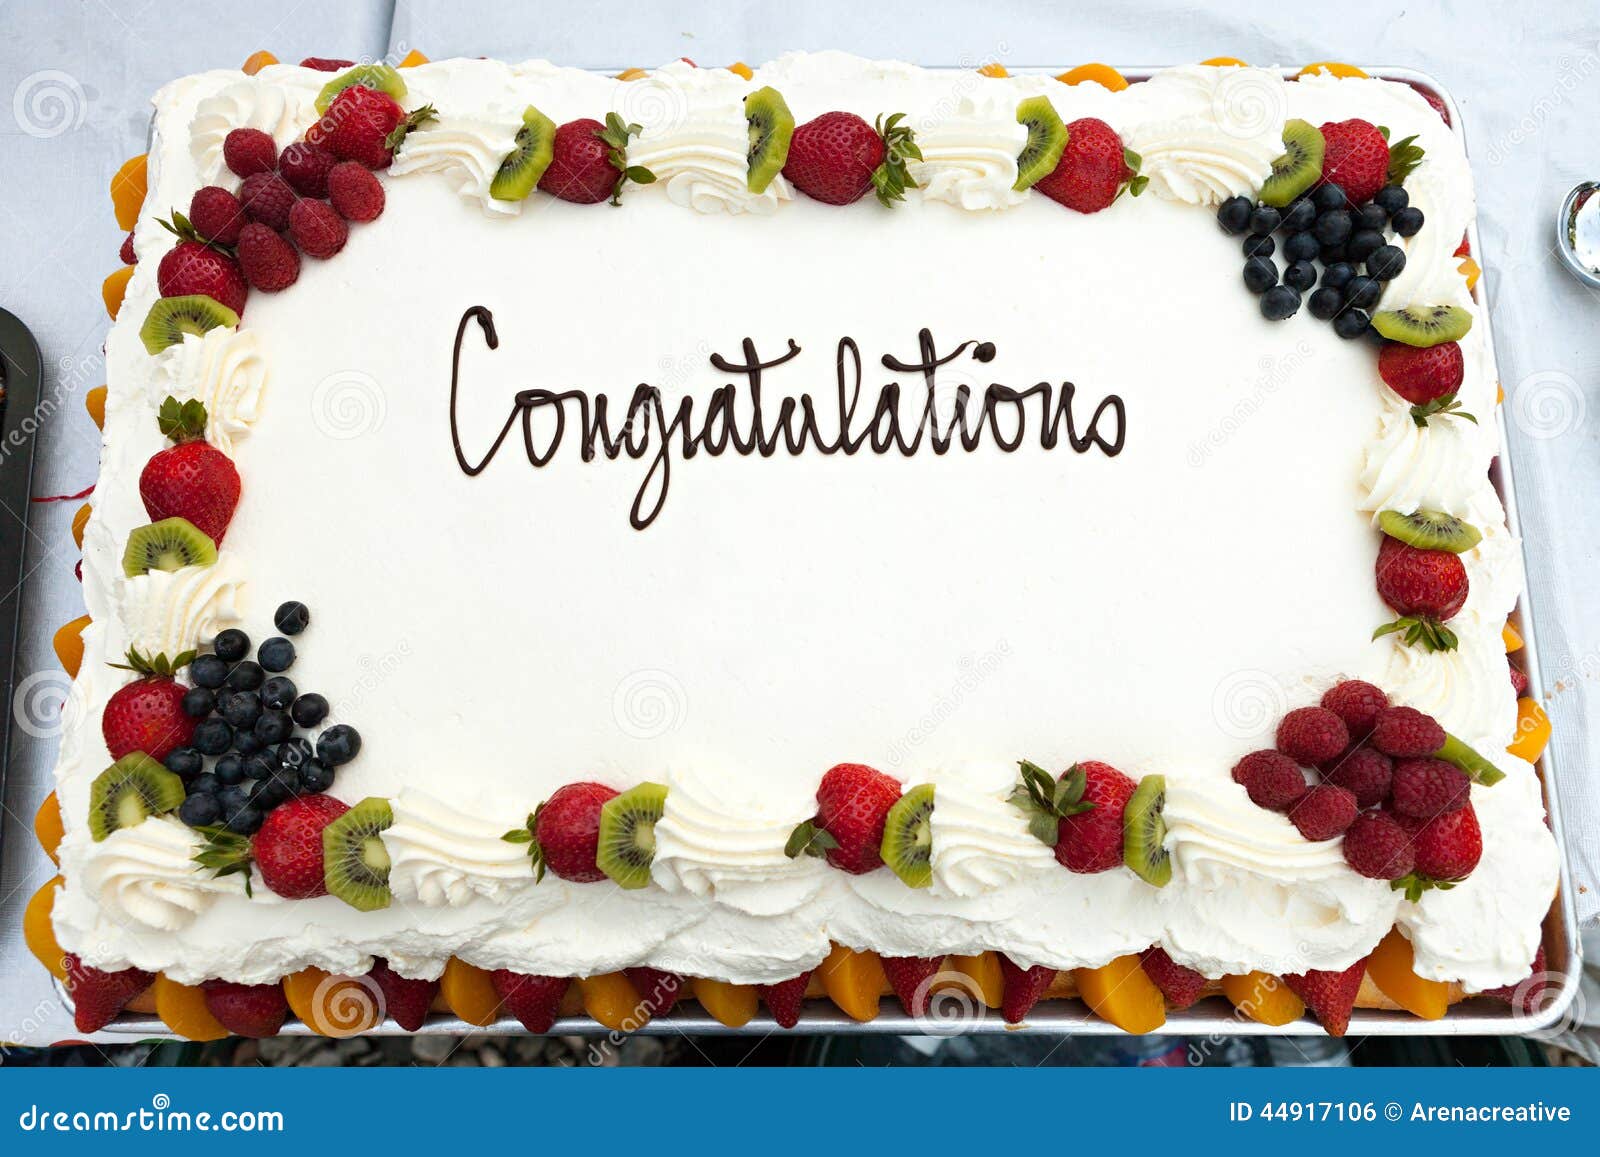 congratulations-cake-fruit-white-frosted-border-message-reads-44917106.jpg